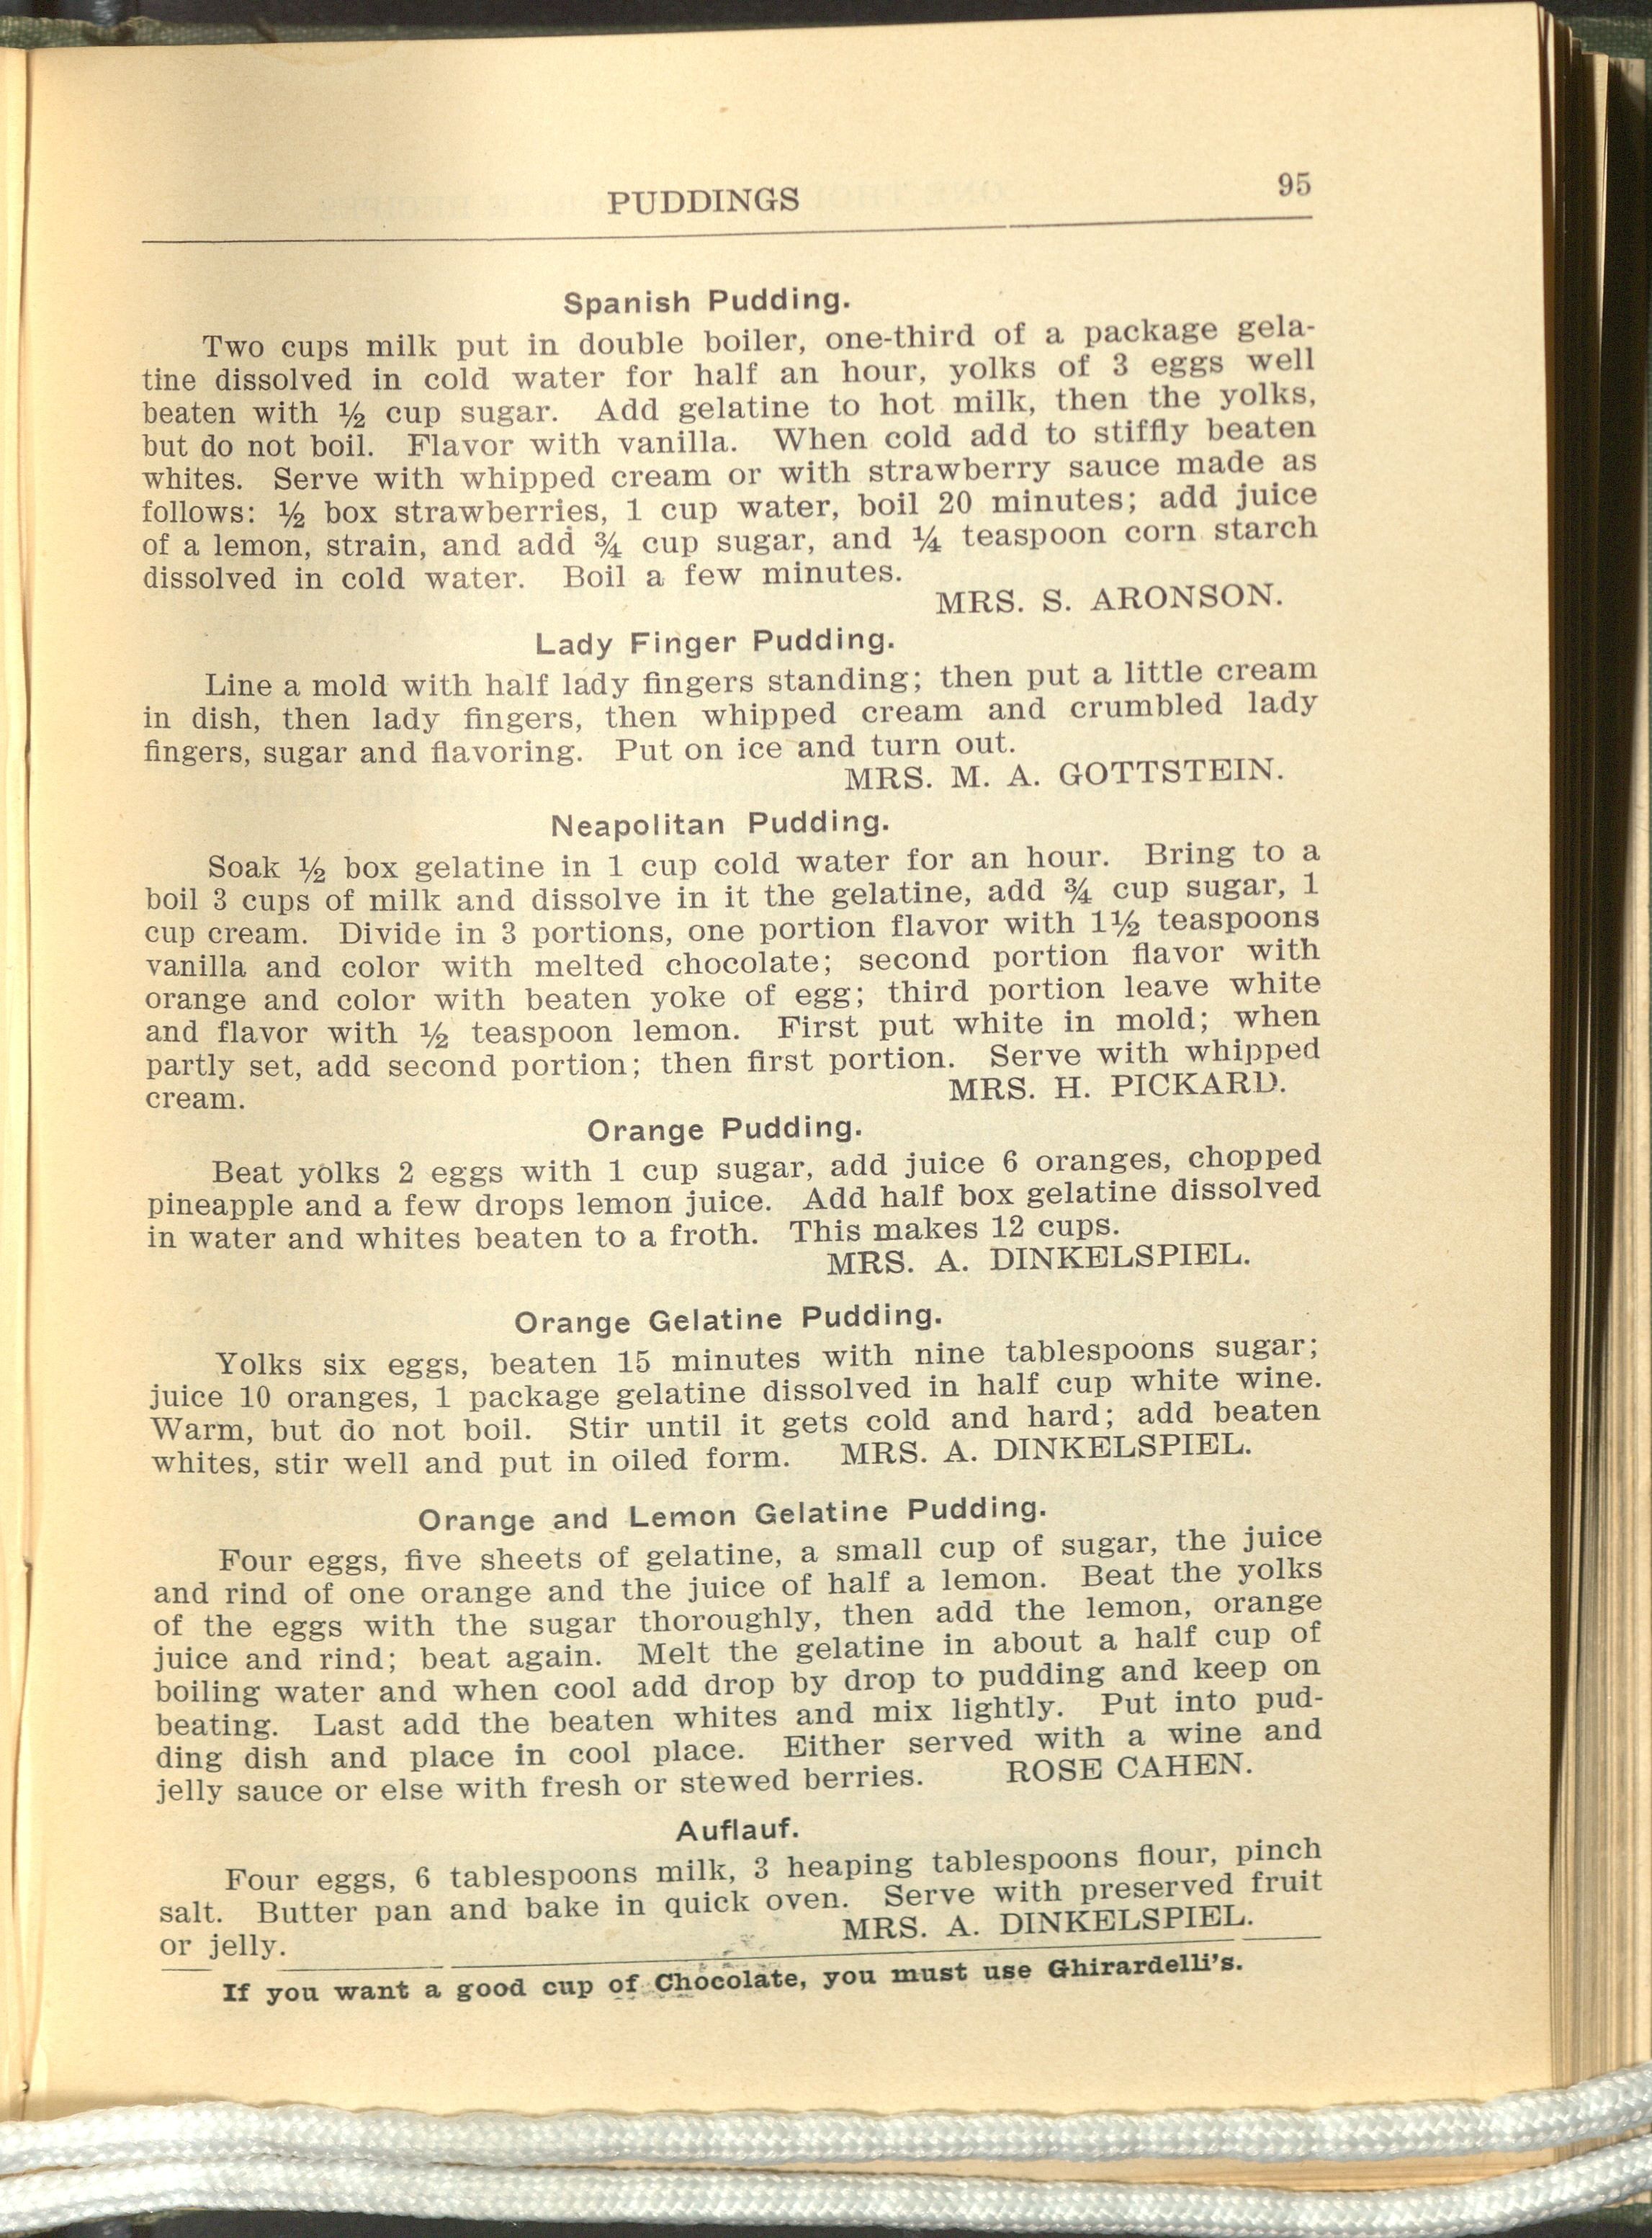 Page containing several brief recipes, paragraph-style for dishes including Spanish Pudding, Lady Finger Pudding, Neapolitan Pudding, and others. 